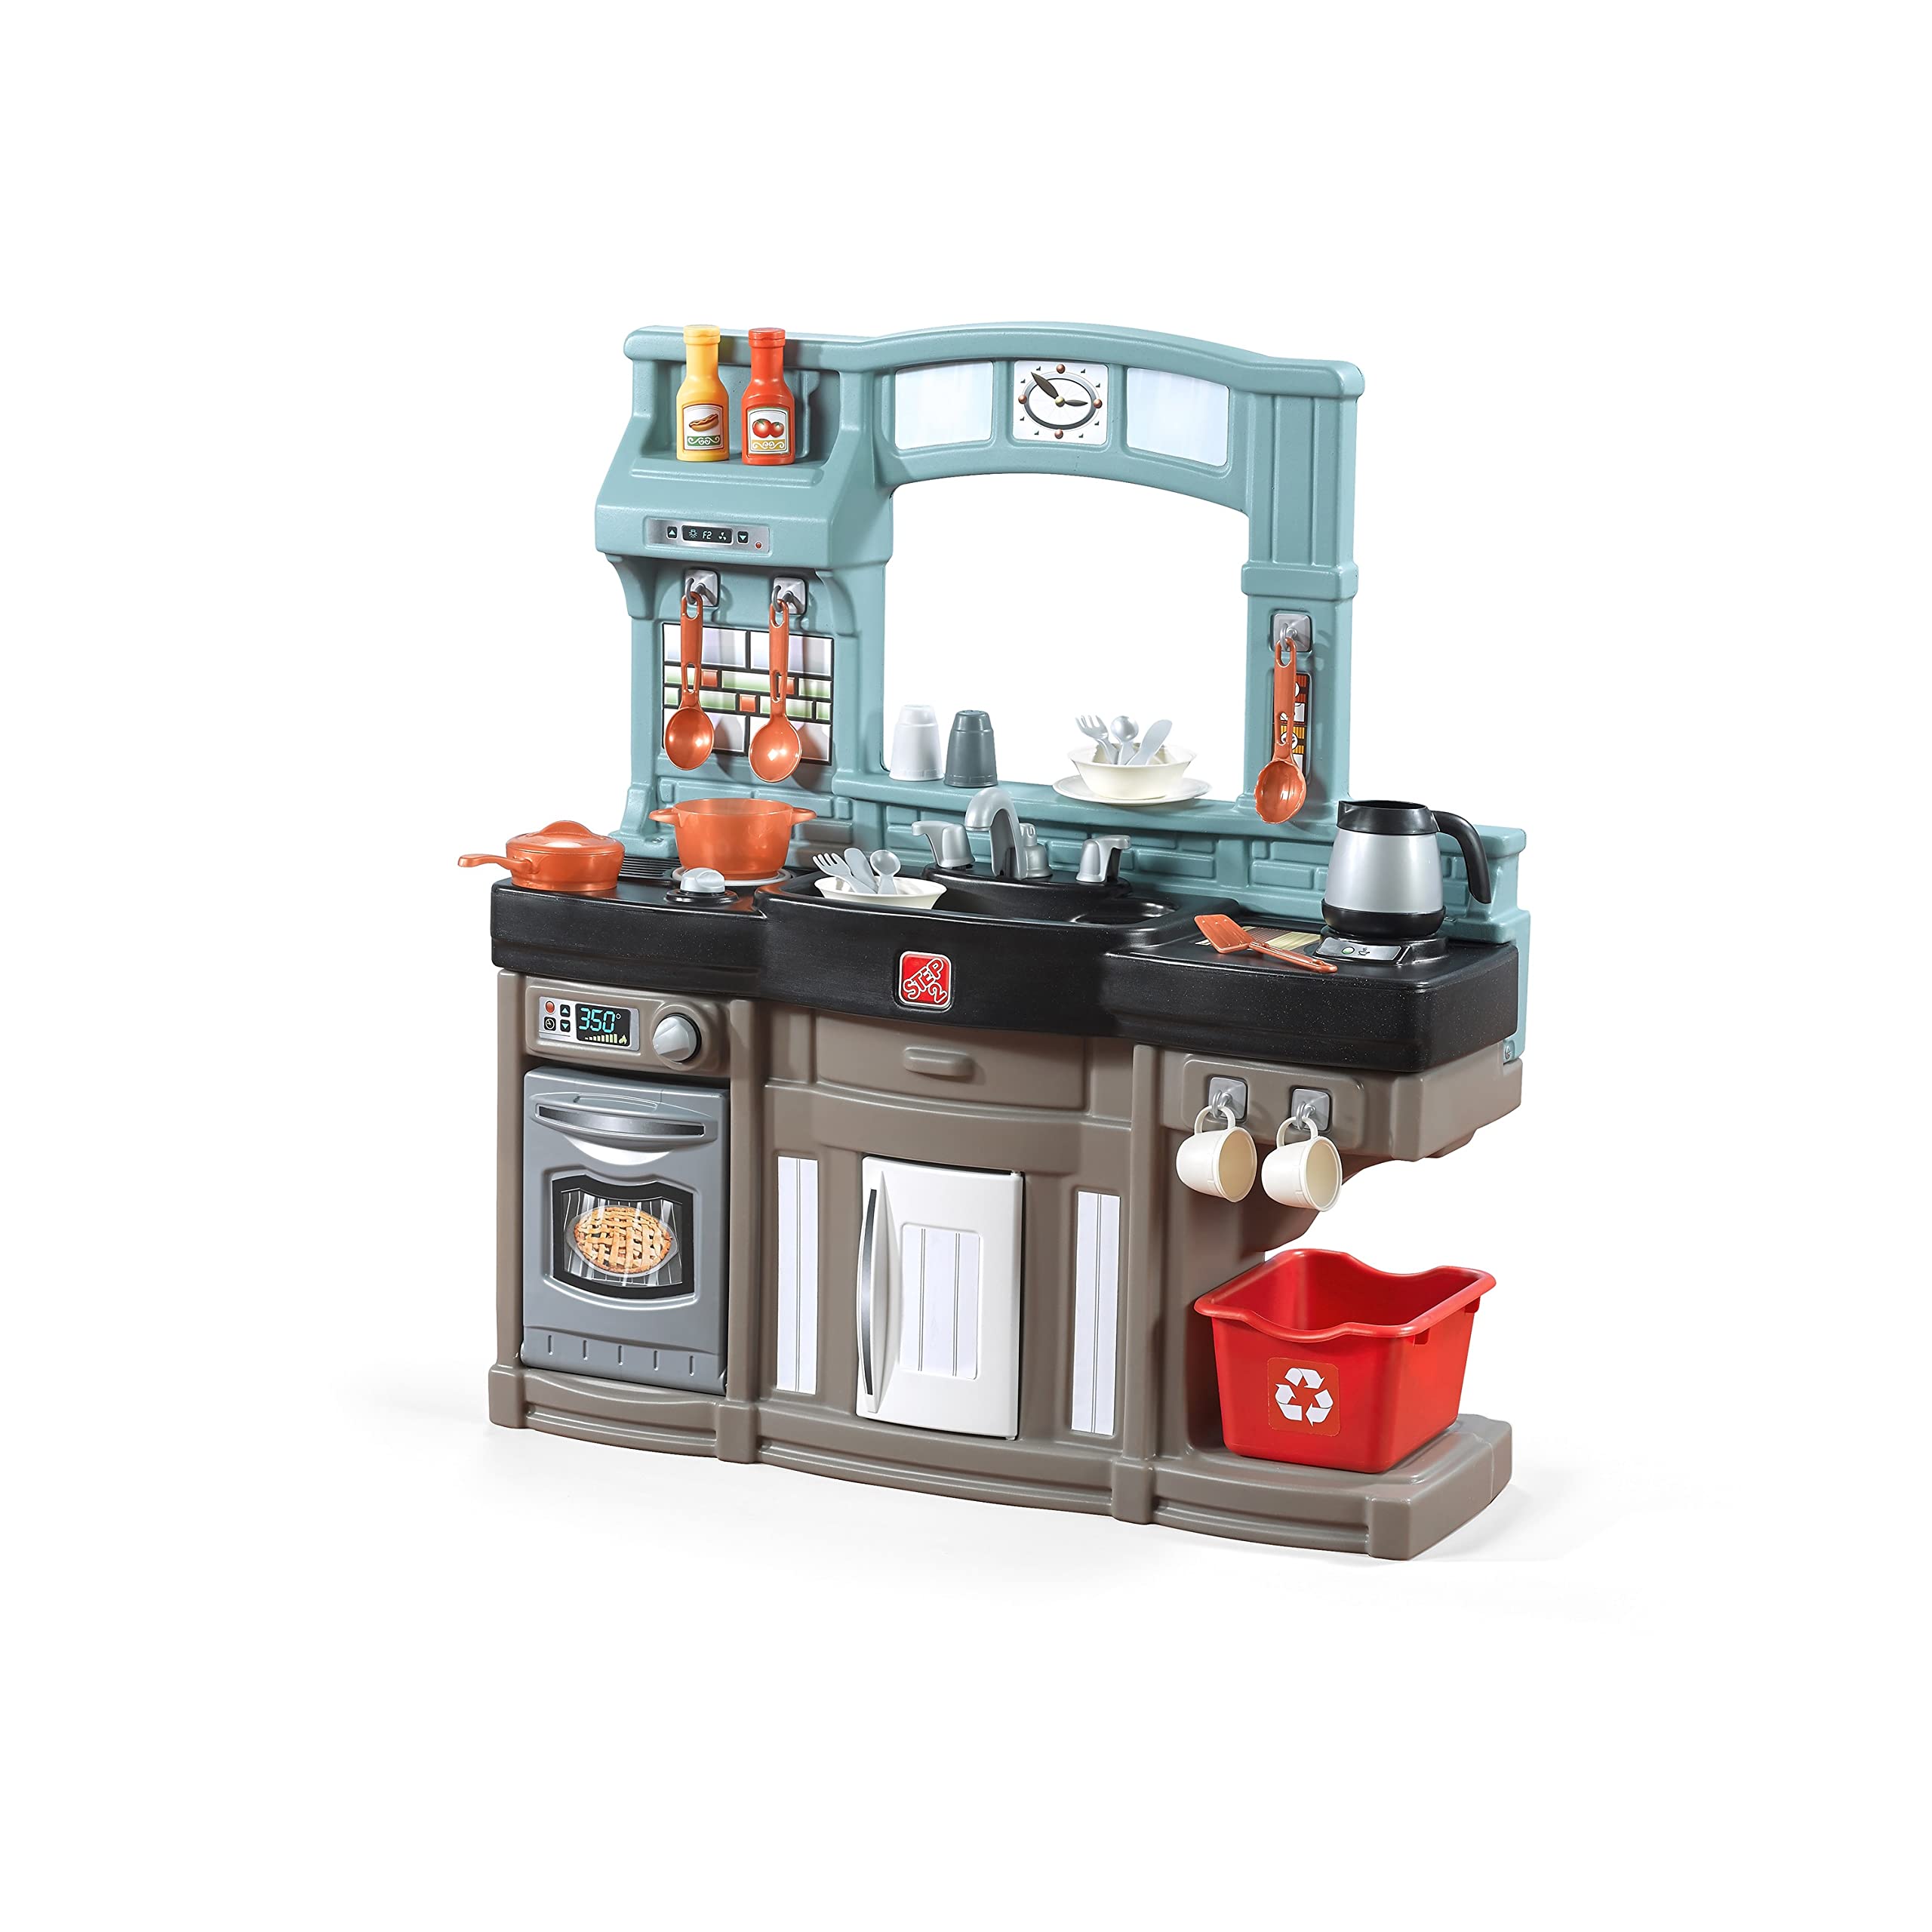  Step2 Best Chefs Kitchen Set for Kids – Includes 25 Toy Kitchen Accessories, Interactive Features for Realistic Pretend Play – Indoor/Outdoor Toddler Playset – Dimensions: 35.8” H x 34.4” W...